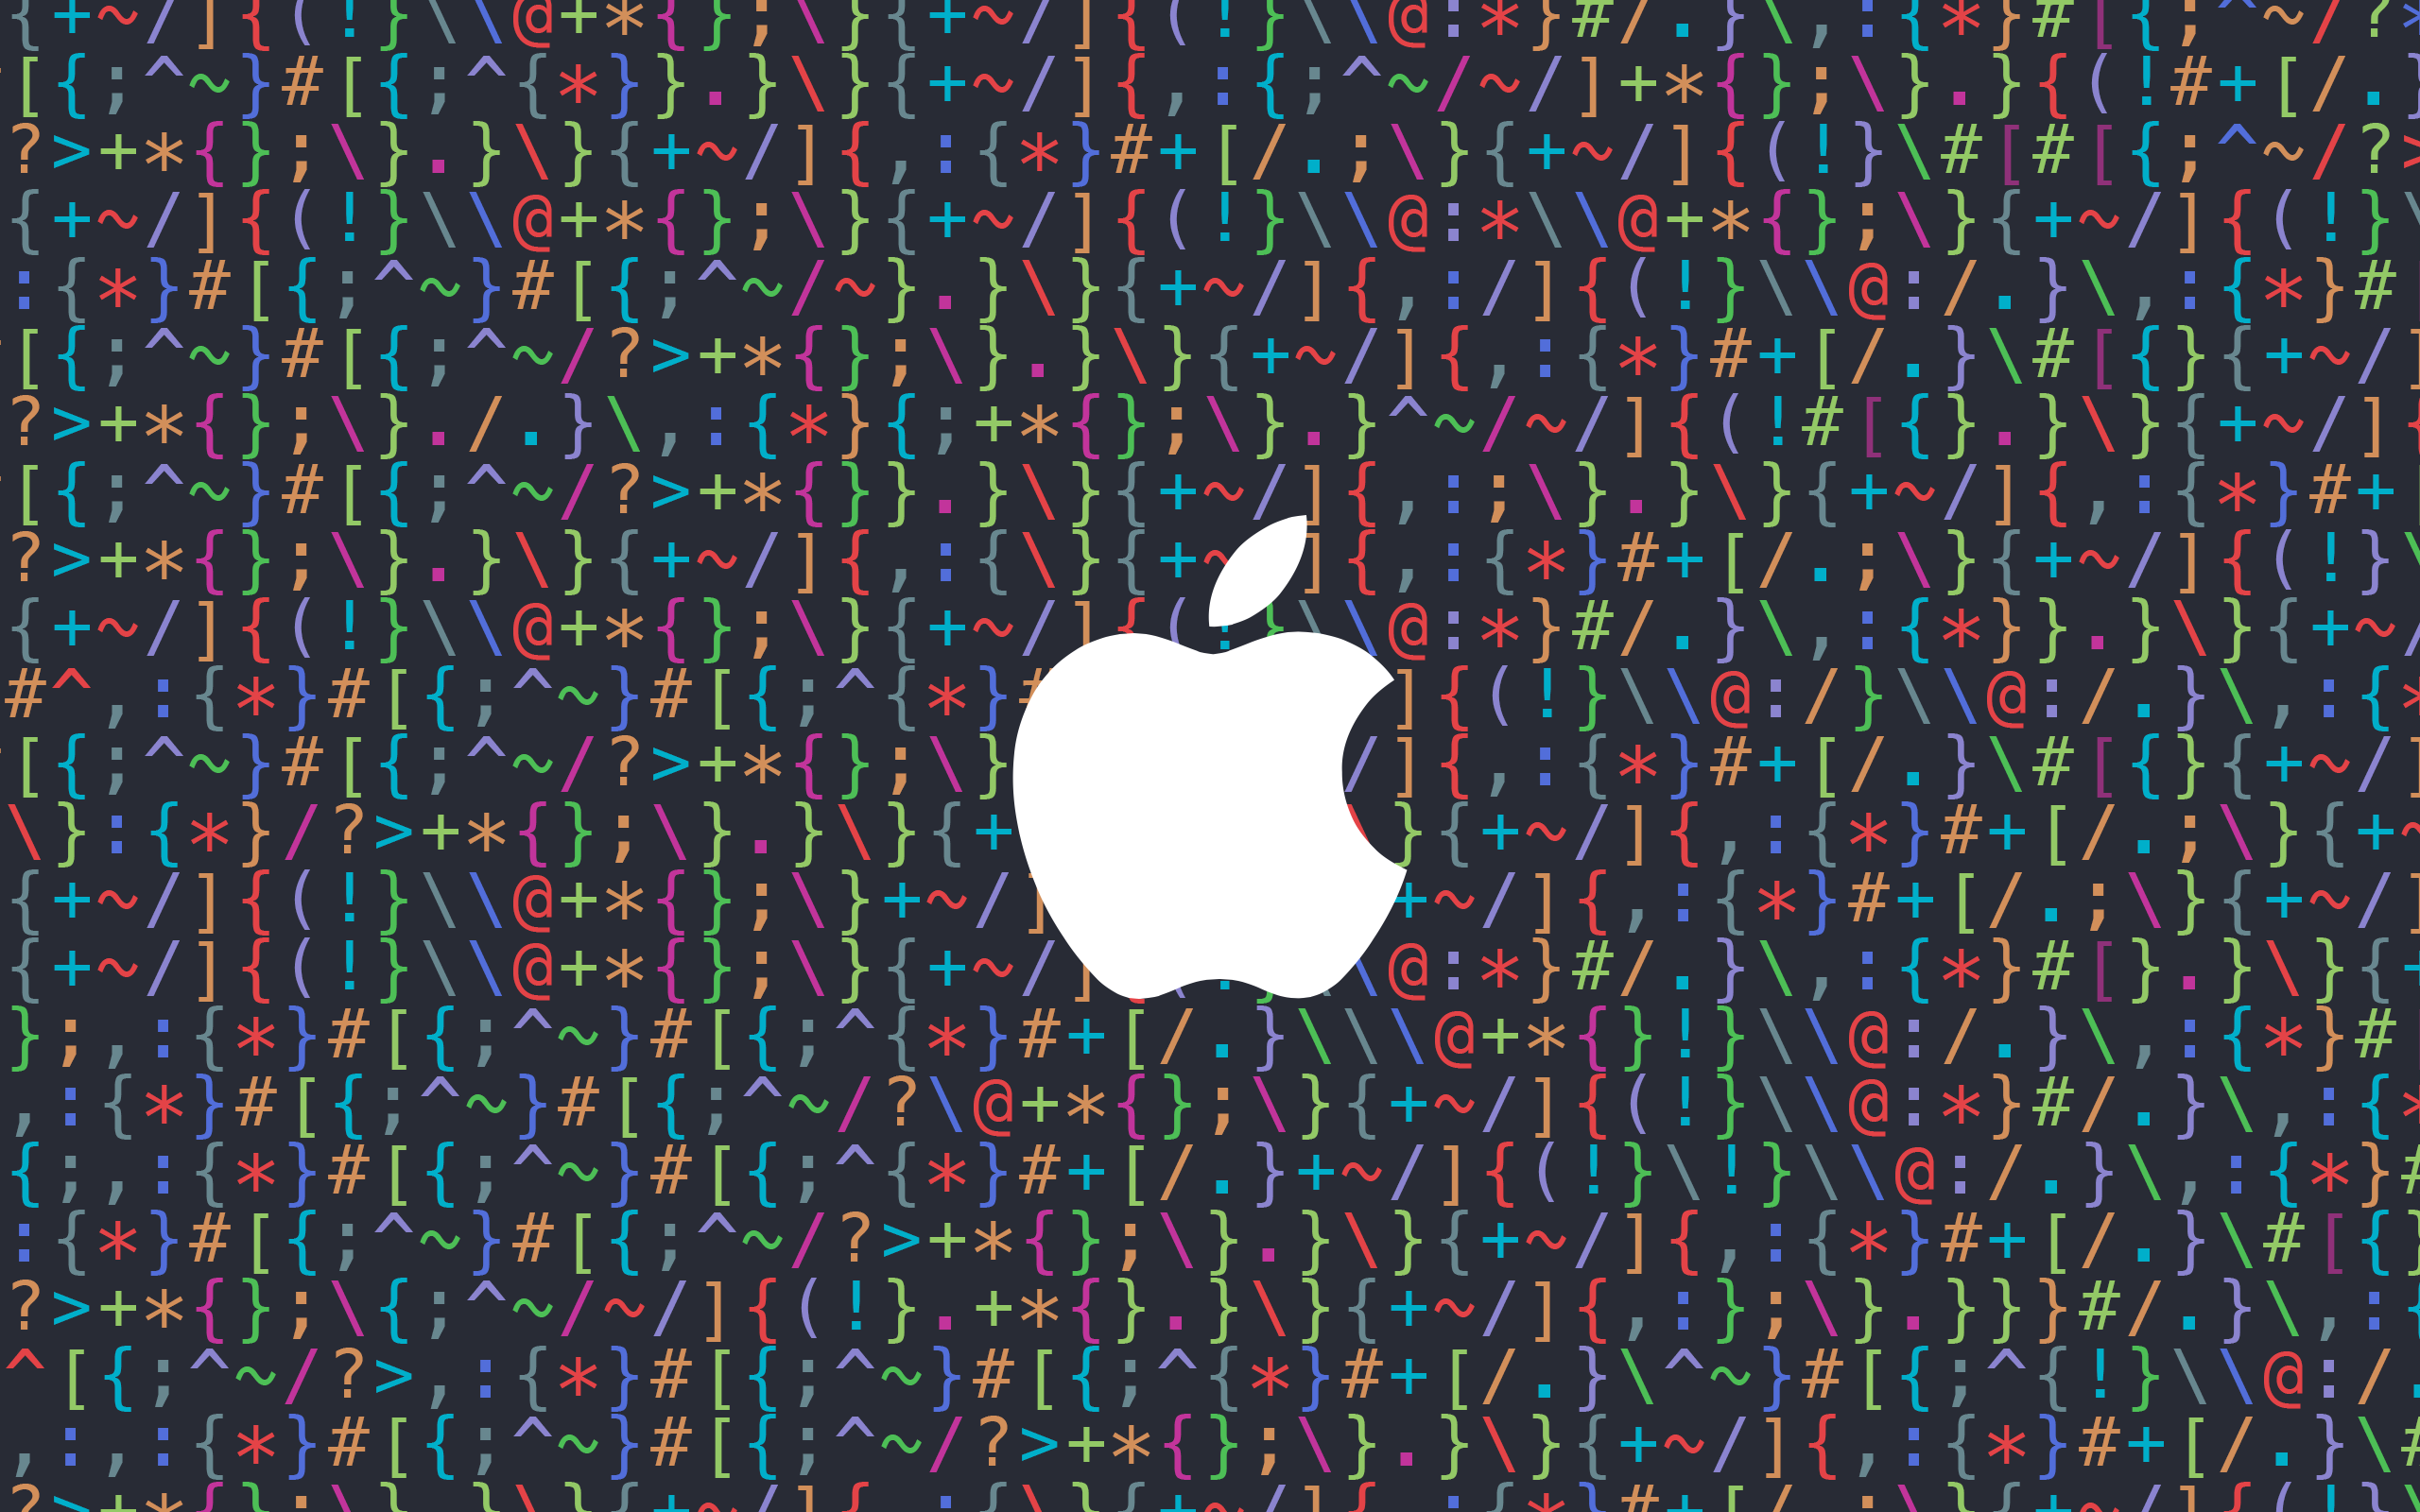 Even more great WWDC 2016 wallpapers